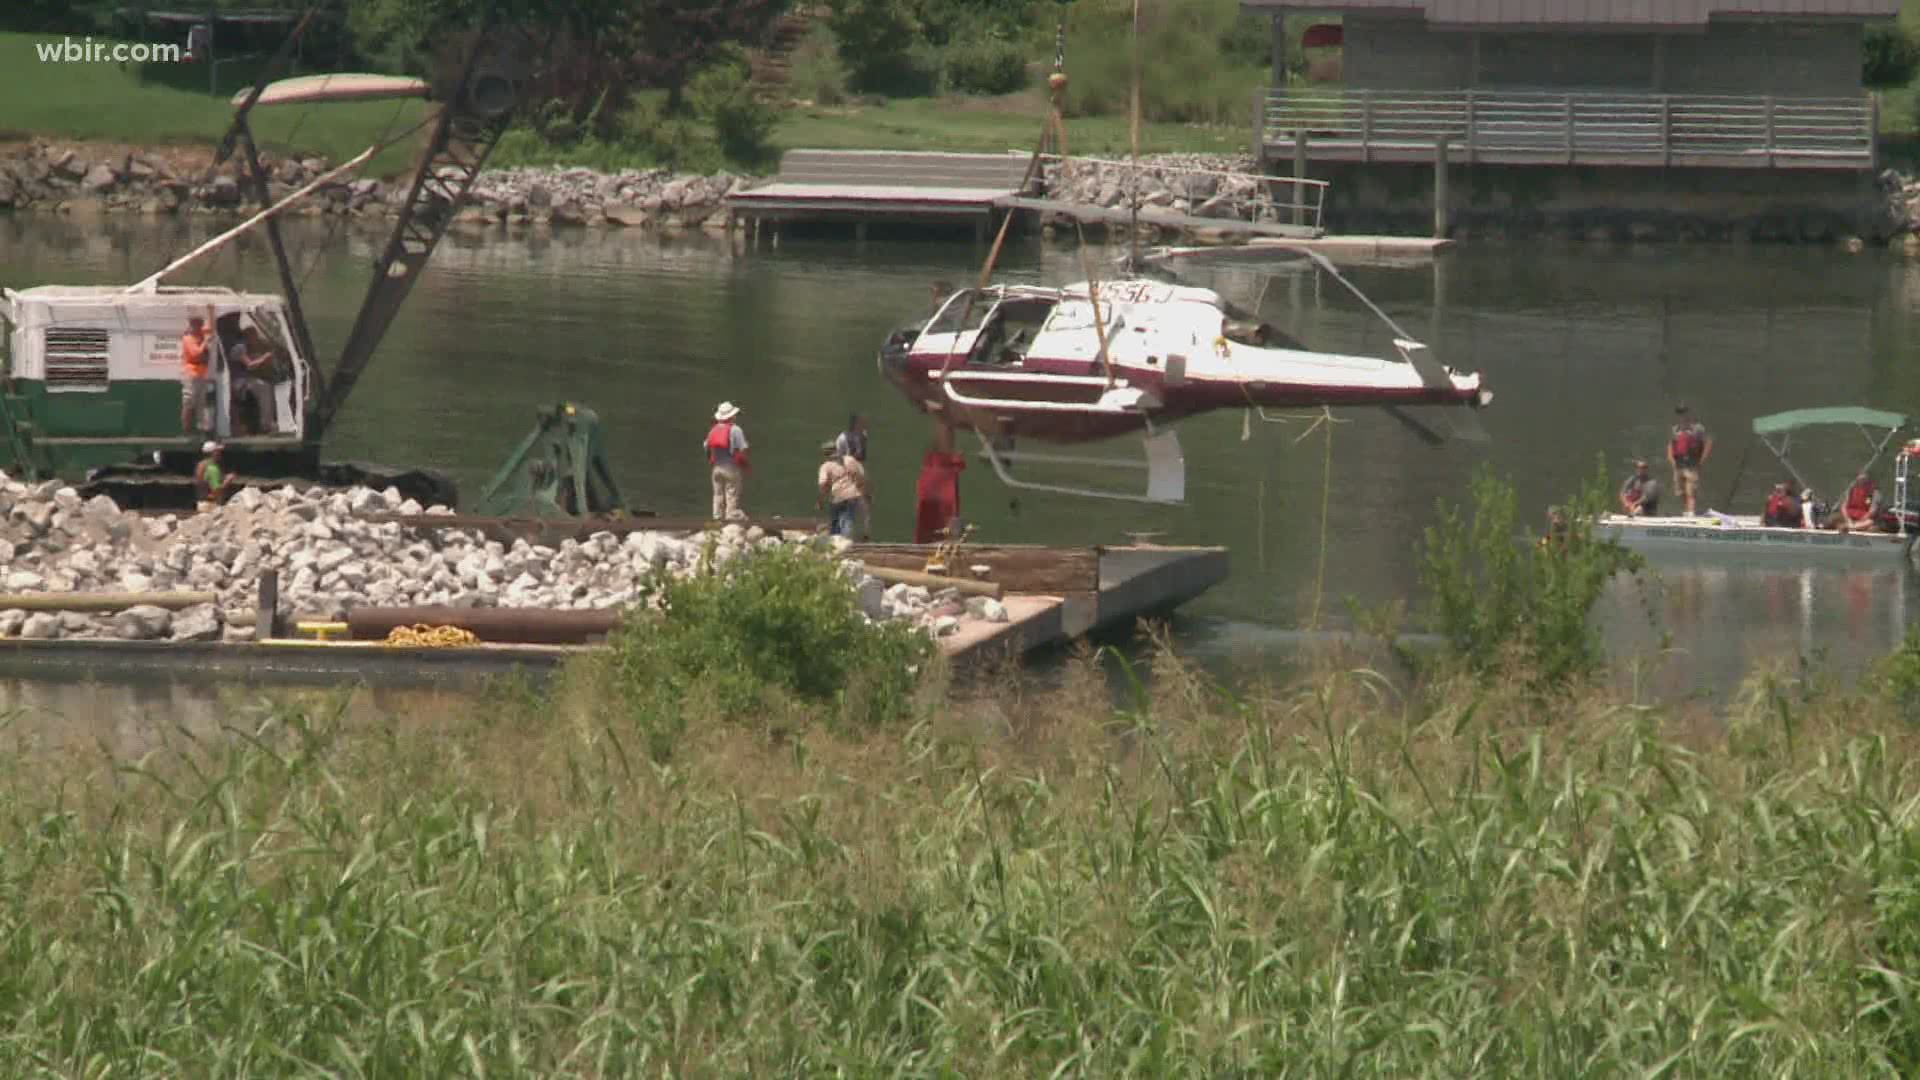 A man died on Monday night after the helicopter went down on the Tennessee River.